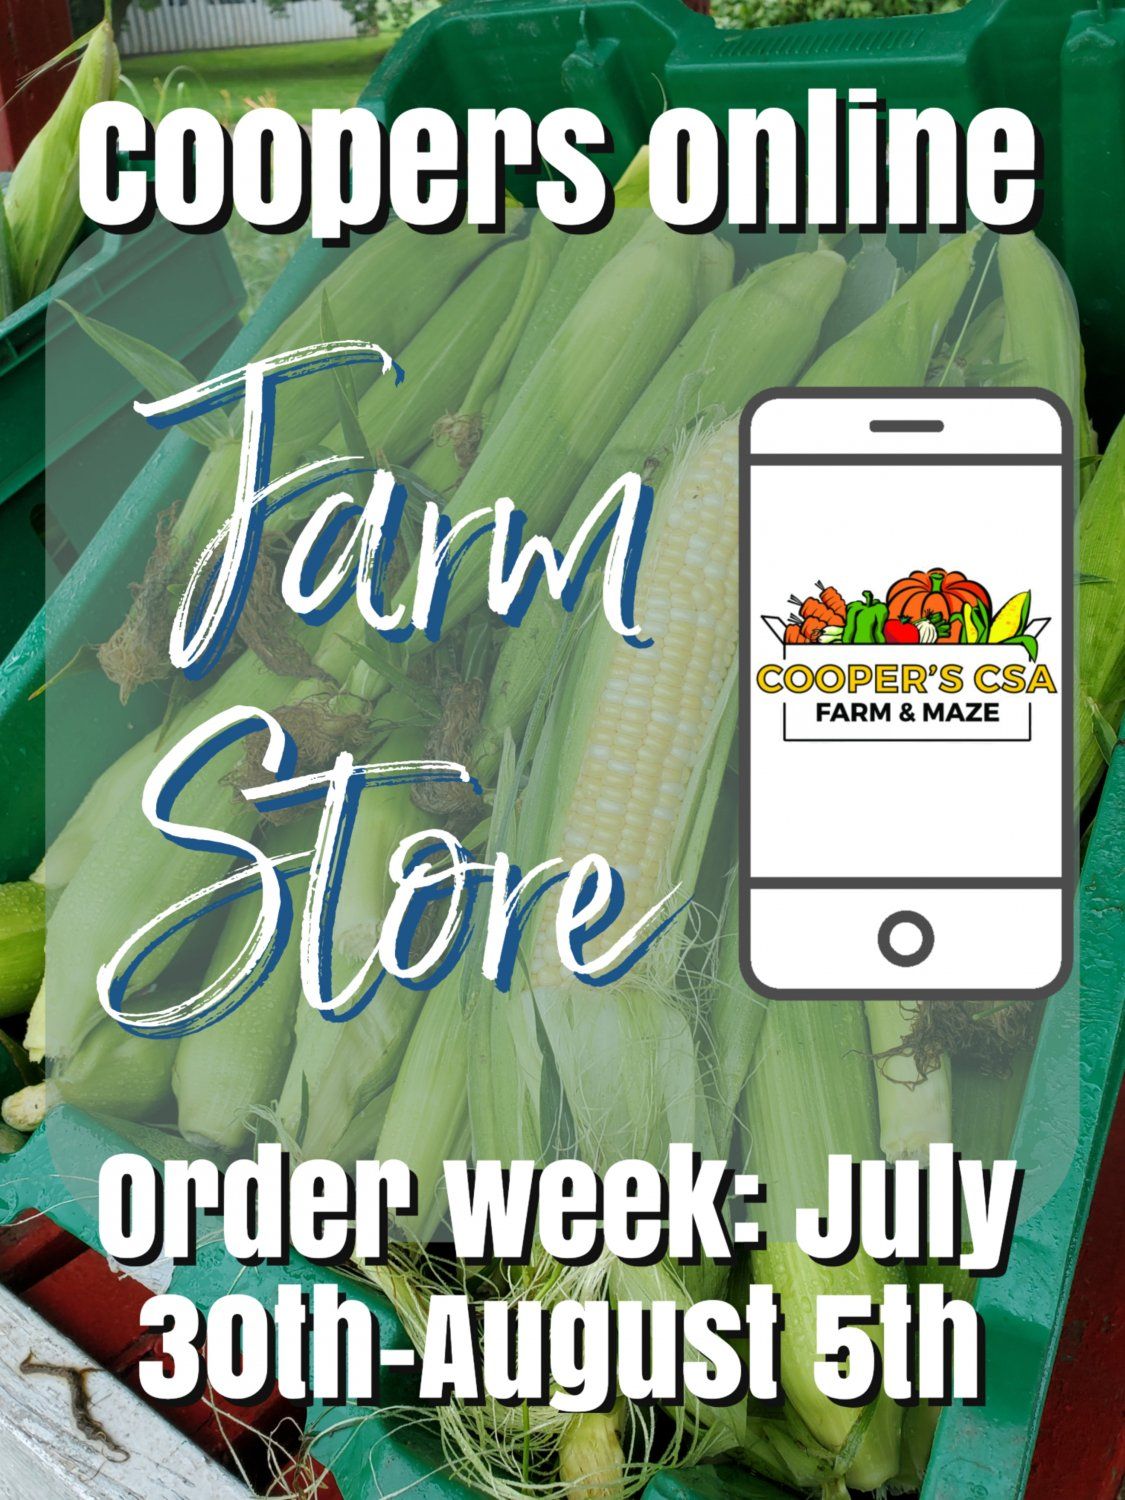 Previous Happening: Coopers Online Farm Stand-Order Week July 30th-August 5th